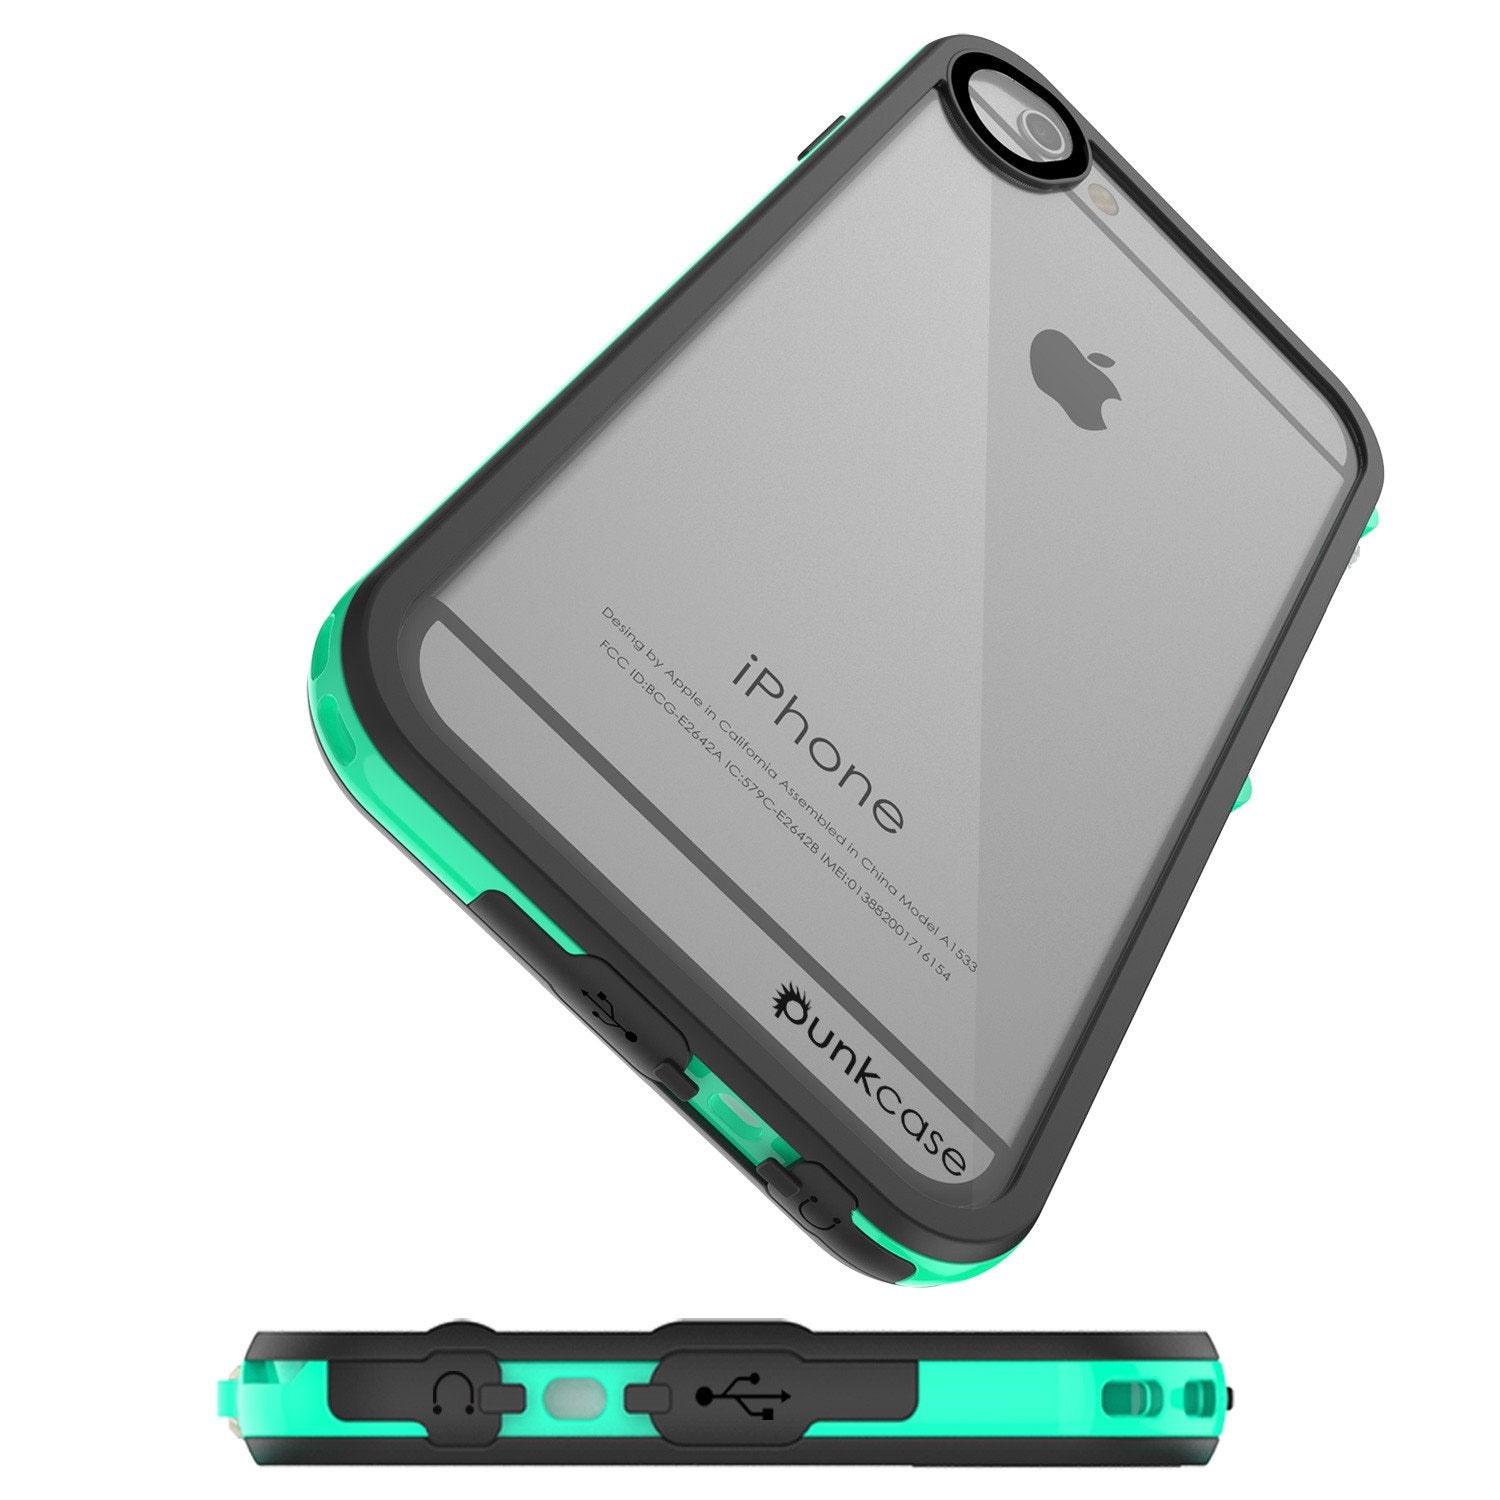 Apple iPhone 7/6s/6 Waterproof Case, PUNKcase CRYSTAL 2.0 Teal W/ Attached Screen Protector  | Warranty